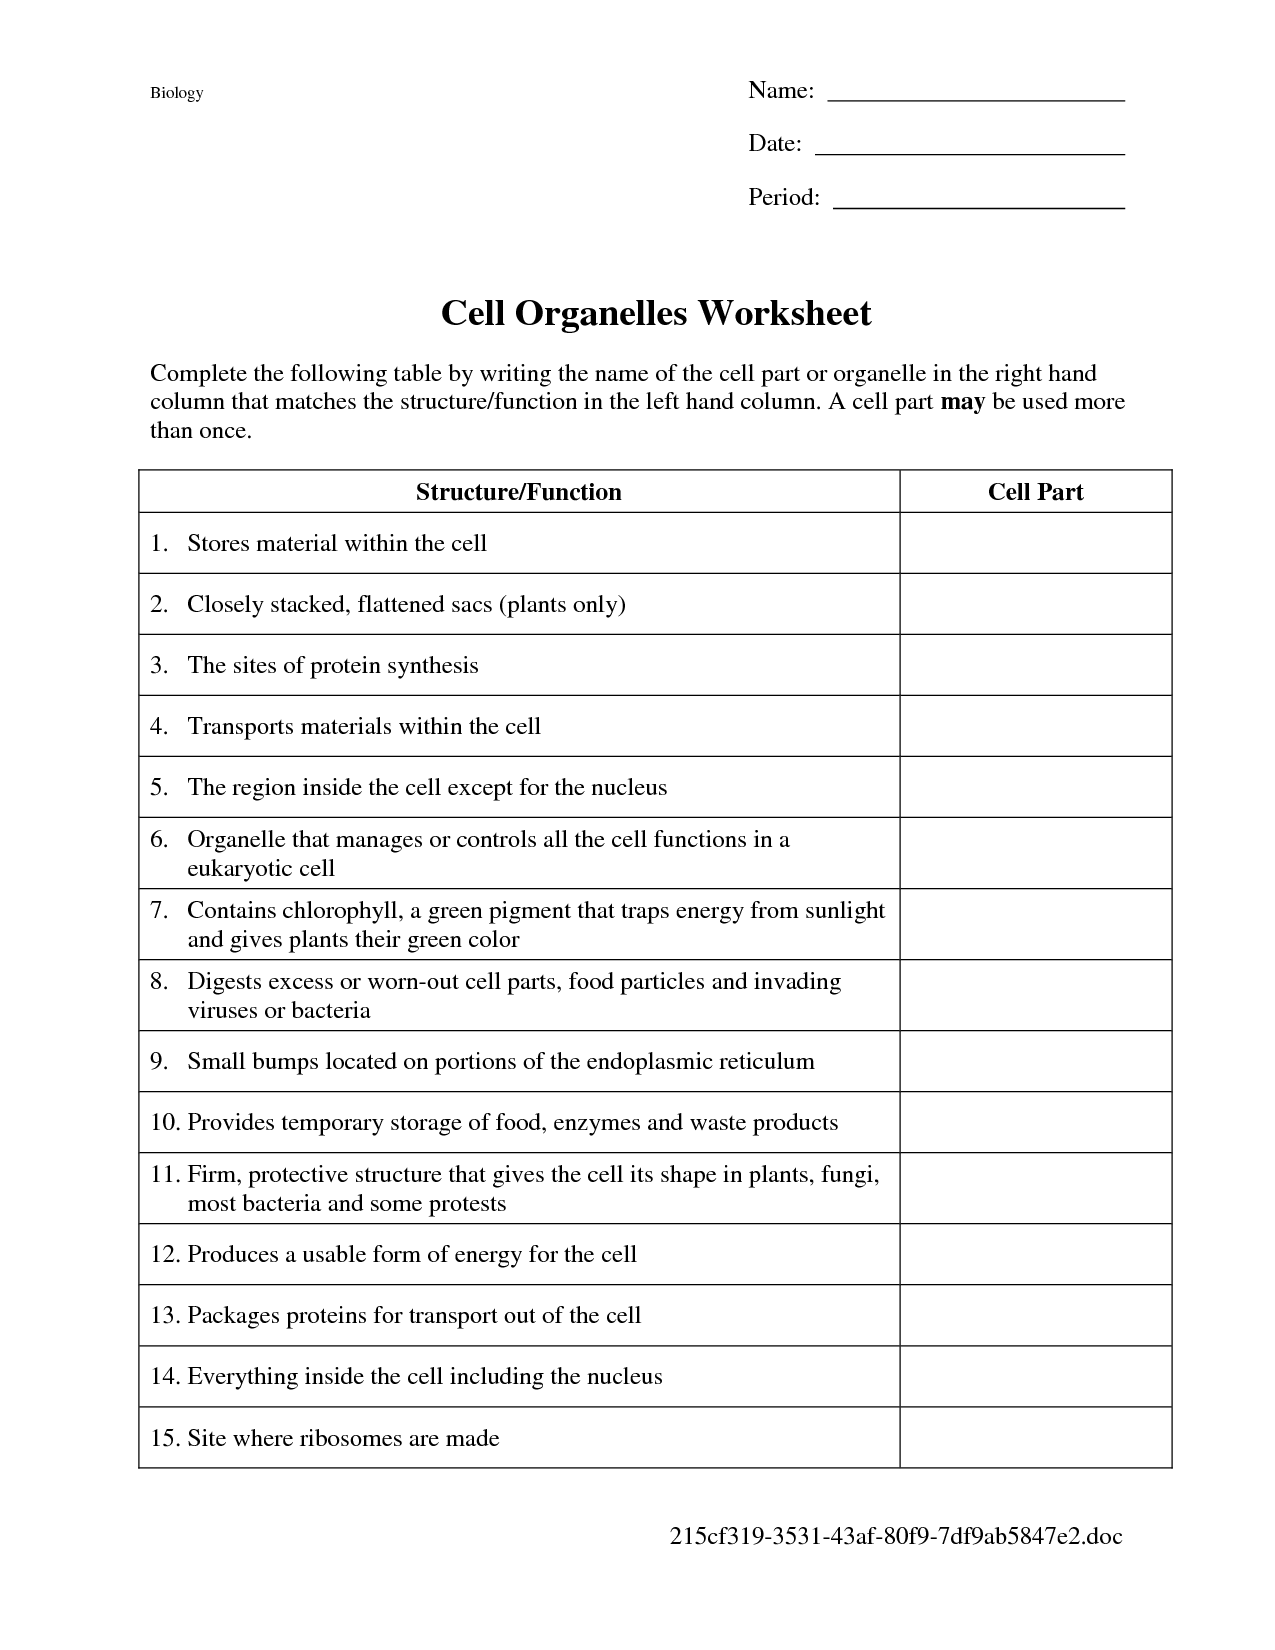 13-best-images-of-function-of-organelles-worksheet-cell-organelles-worksheet-answers-cell